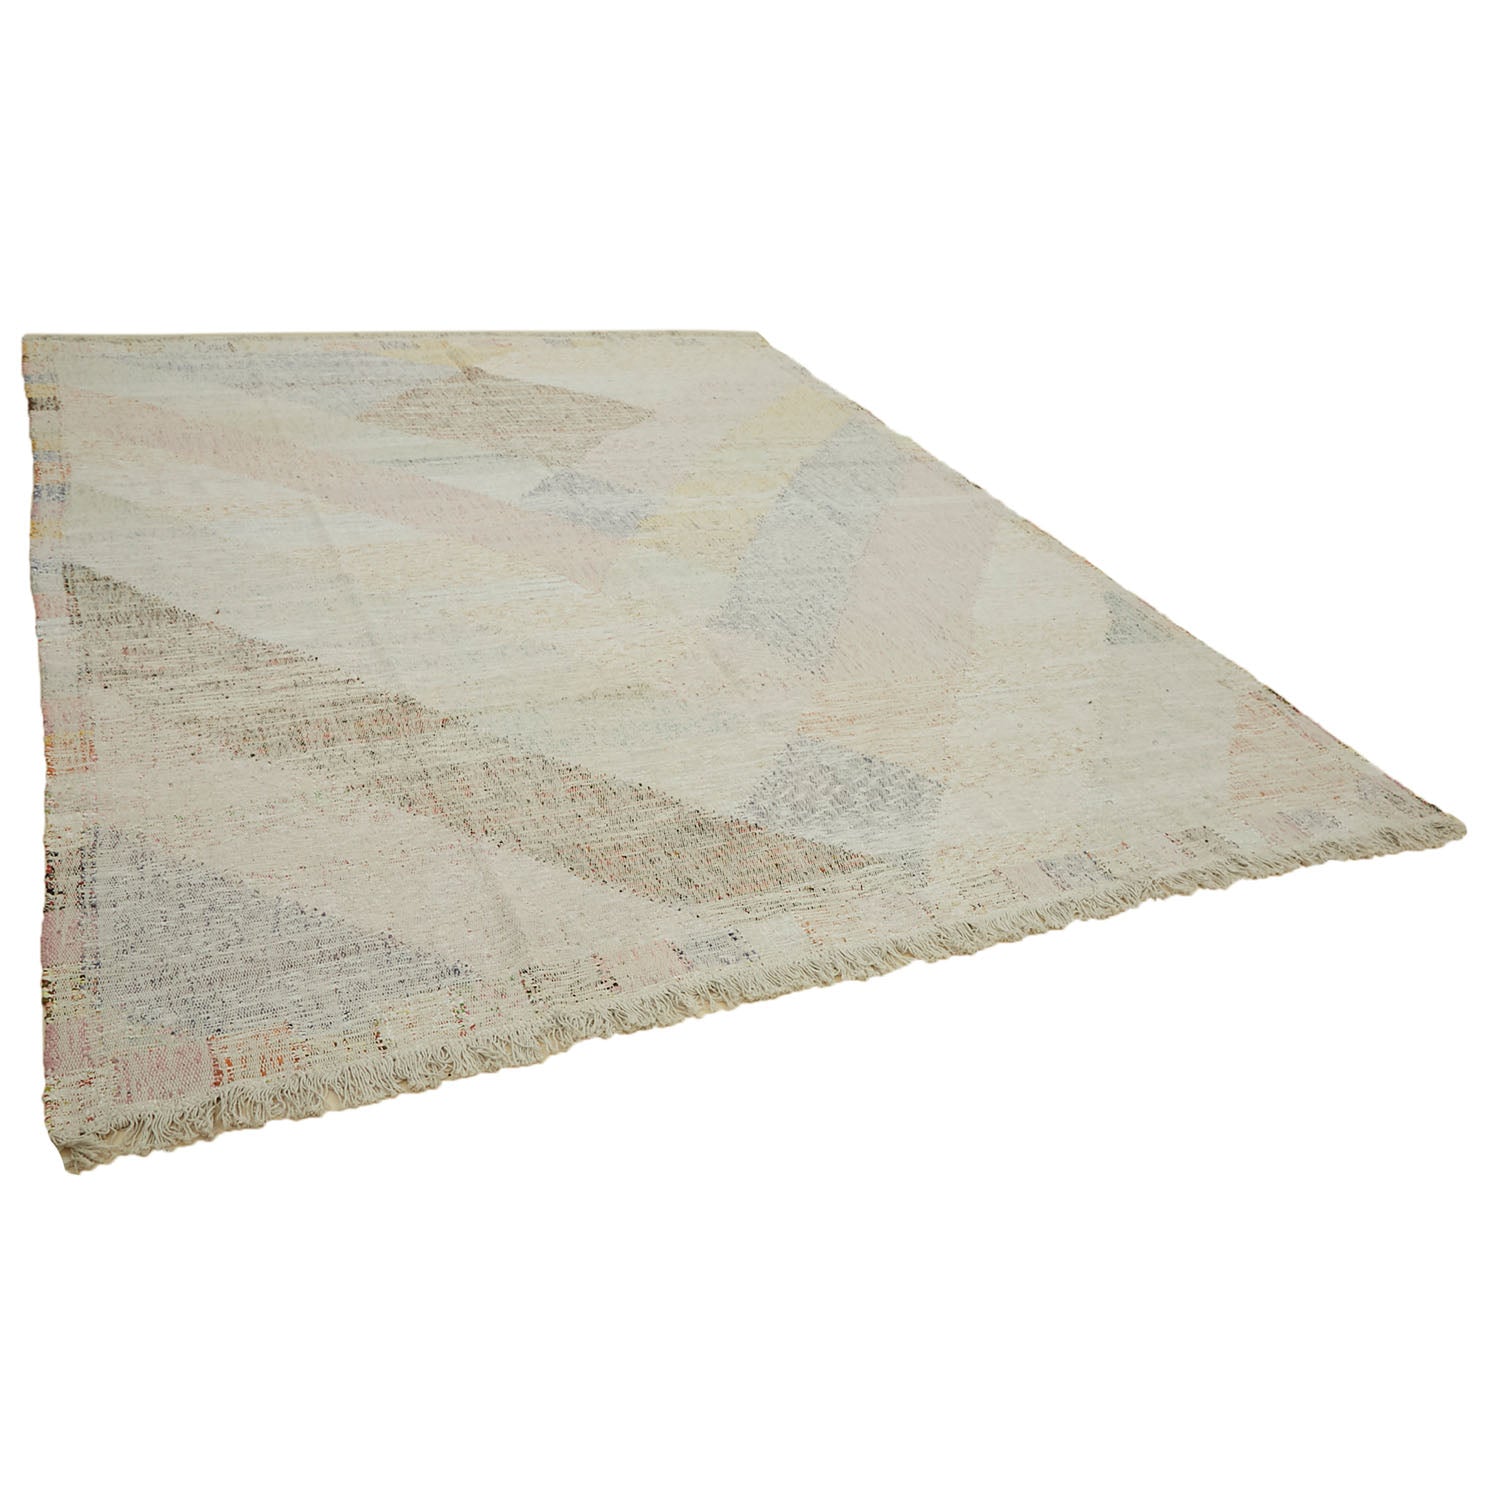 Subtle geometric patterned rug with muted colors and fringed edges.